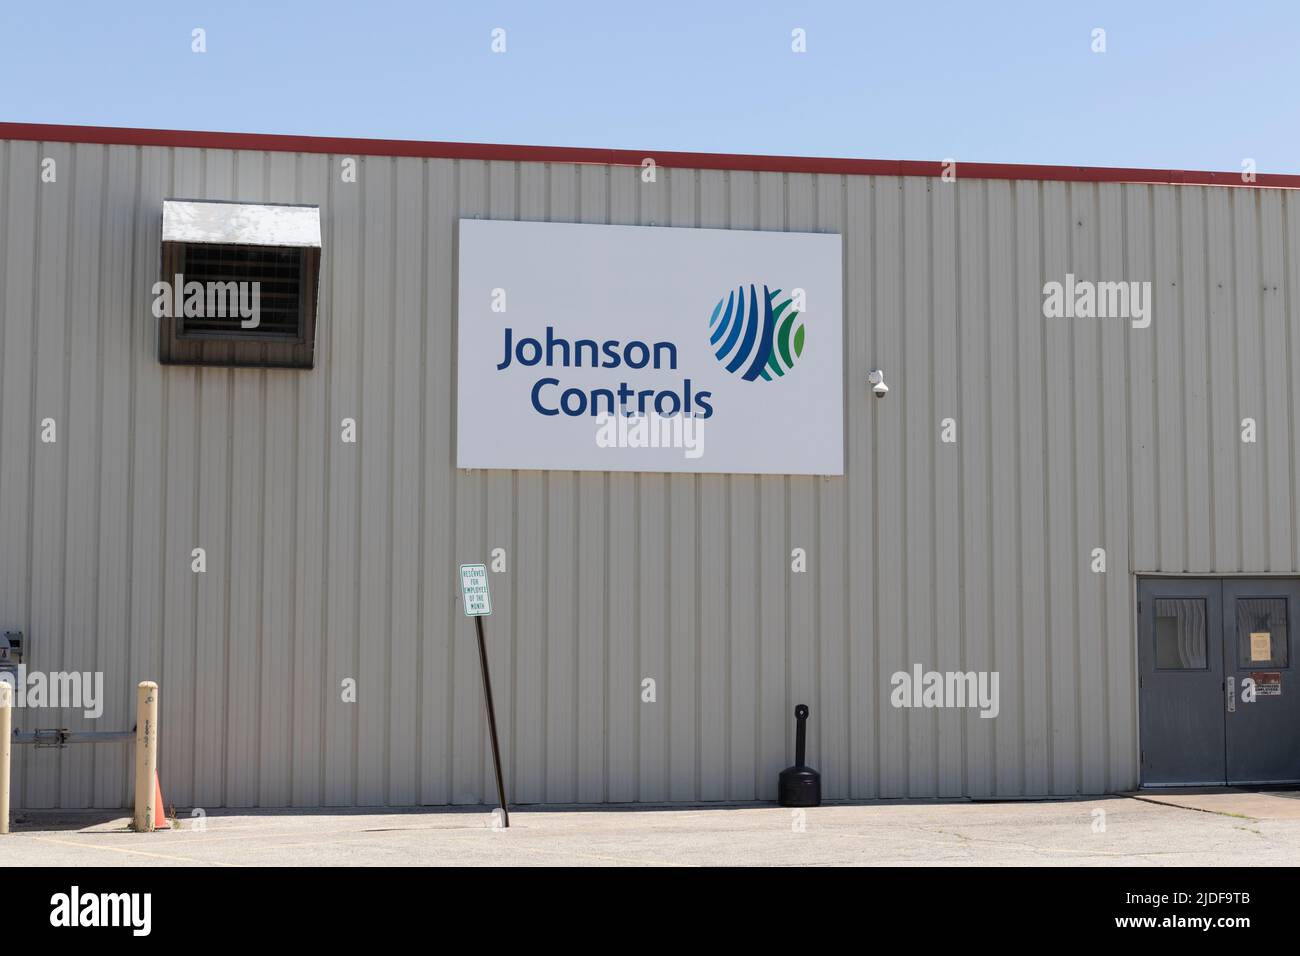 Lebanon - Circa June 2022: Johnson Controls. Johnson Controls merged with Tyco International and produces fire, HVAC, and security equipment. Stock Photo